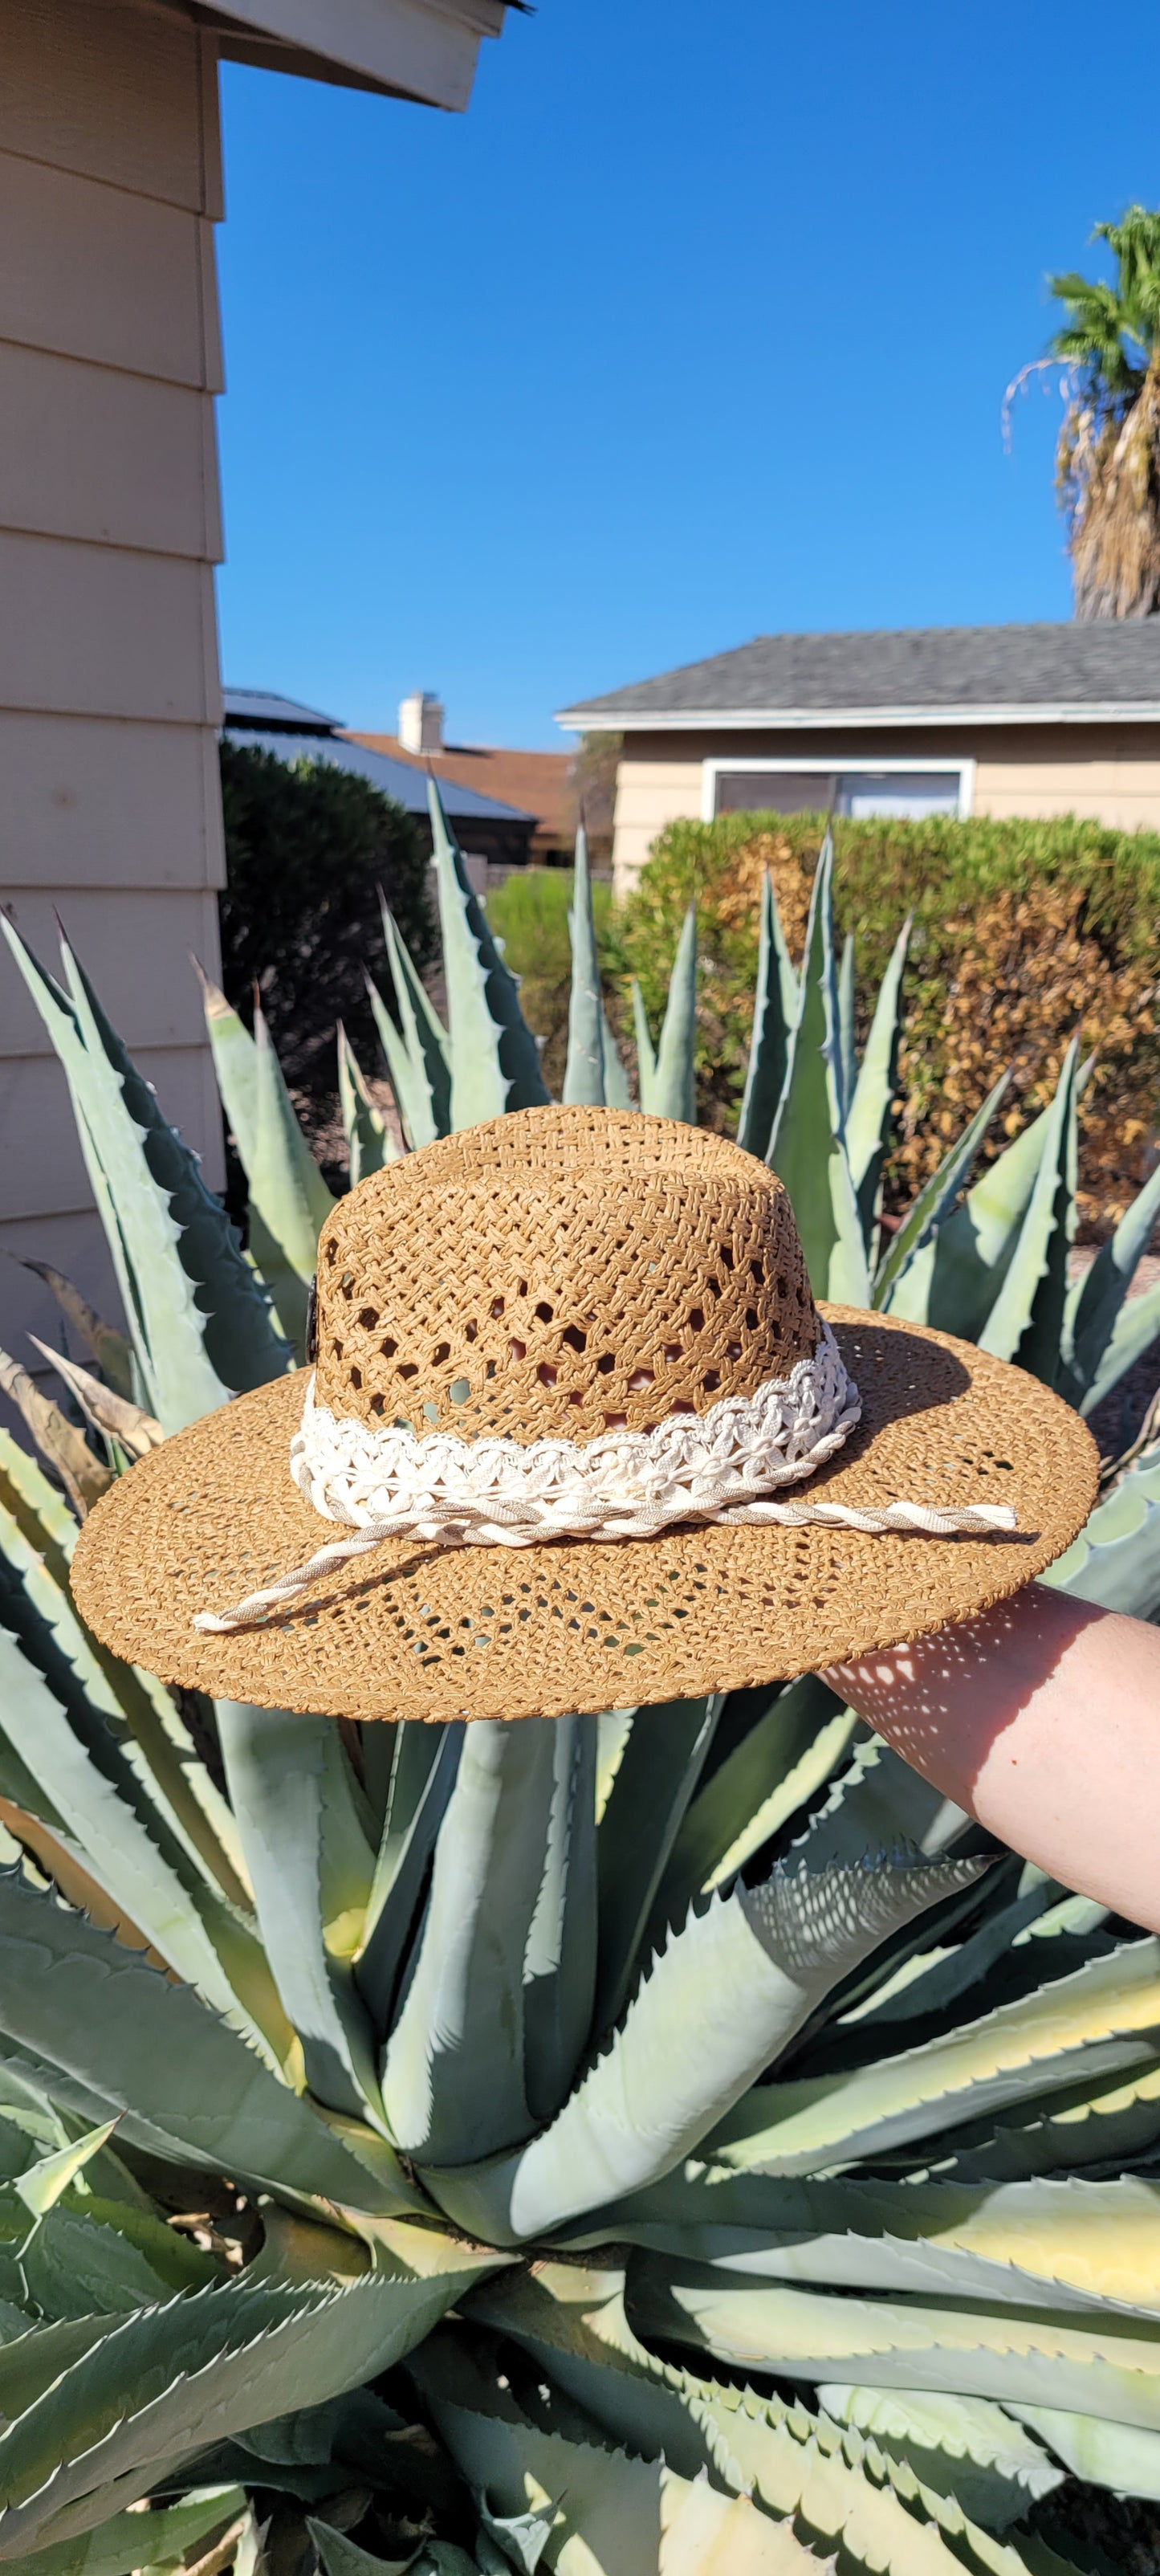 Lace ribbon, twisted gauze, metal horseshoes Straw hat Flat brim 65% polyester and 35% cotton Ribbon drawstring for hat size adjustment Head Circumference: 24" Crown Height: 5" Brim Length: 15.75" Brim Width: 14.75" Branded & numbered inside crown Custom designed by Kayla